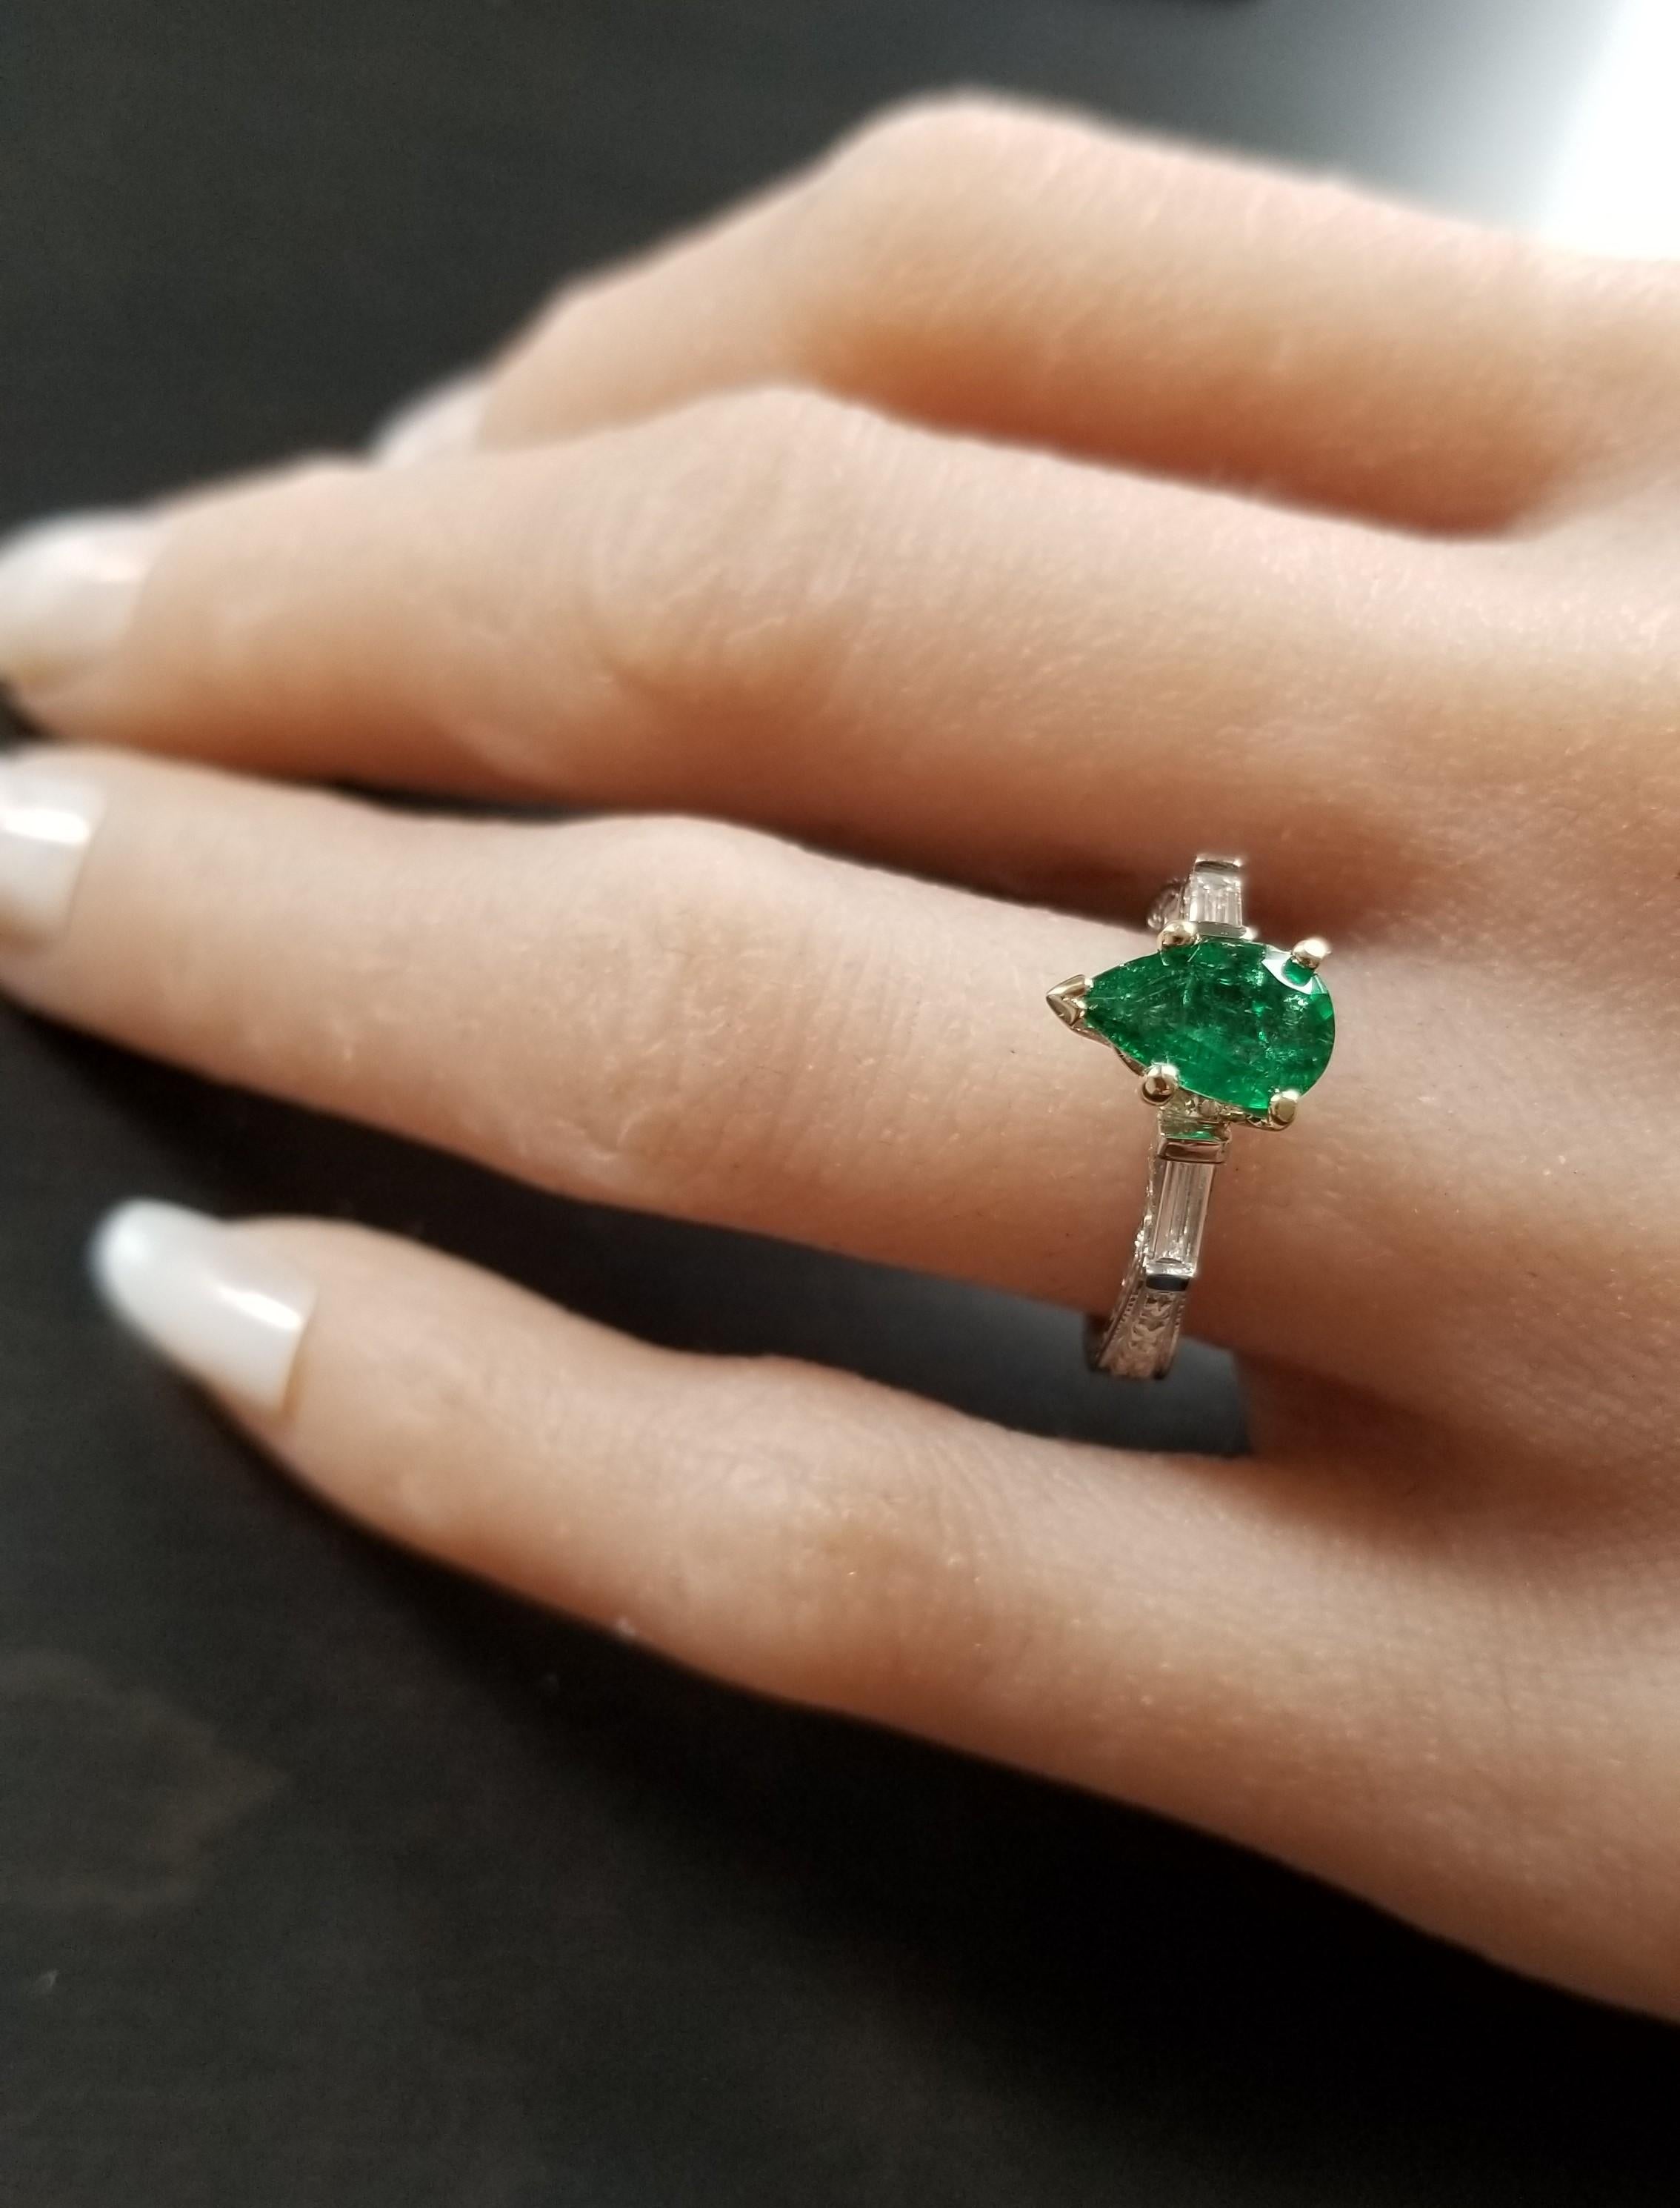 An expertly cut 1.04 carat pear shaped green emerald takes center stage on this classic engagement/anniversary ring. Perfectly matched baguette cut diamonds adorn the sides in a channel bar setting. The hand engraving on the shank is exceptional.